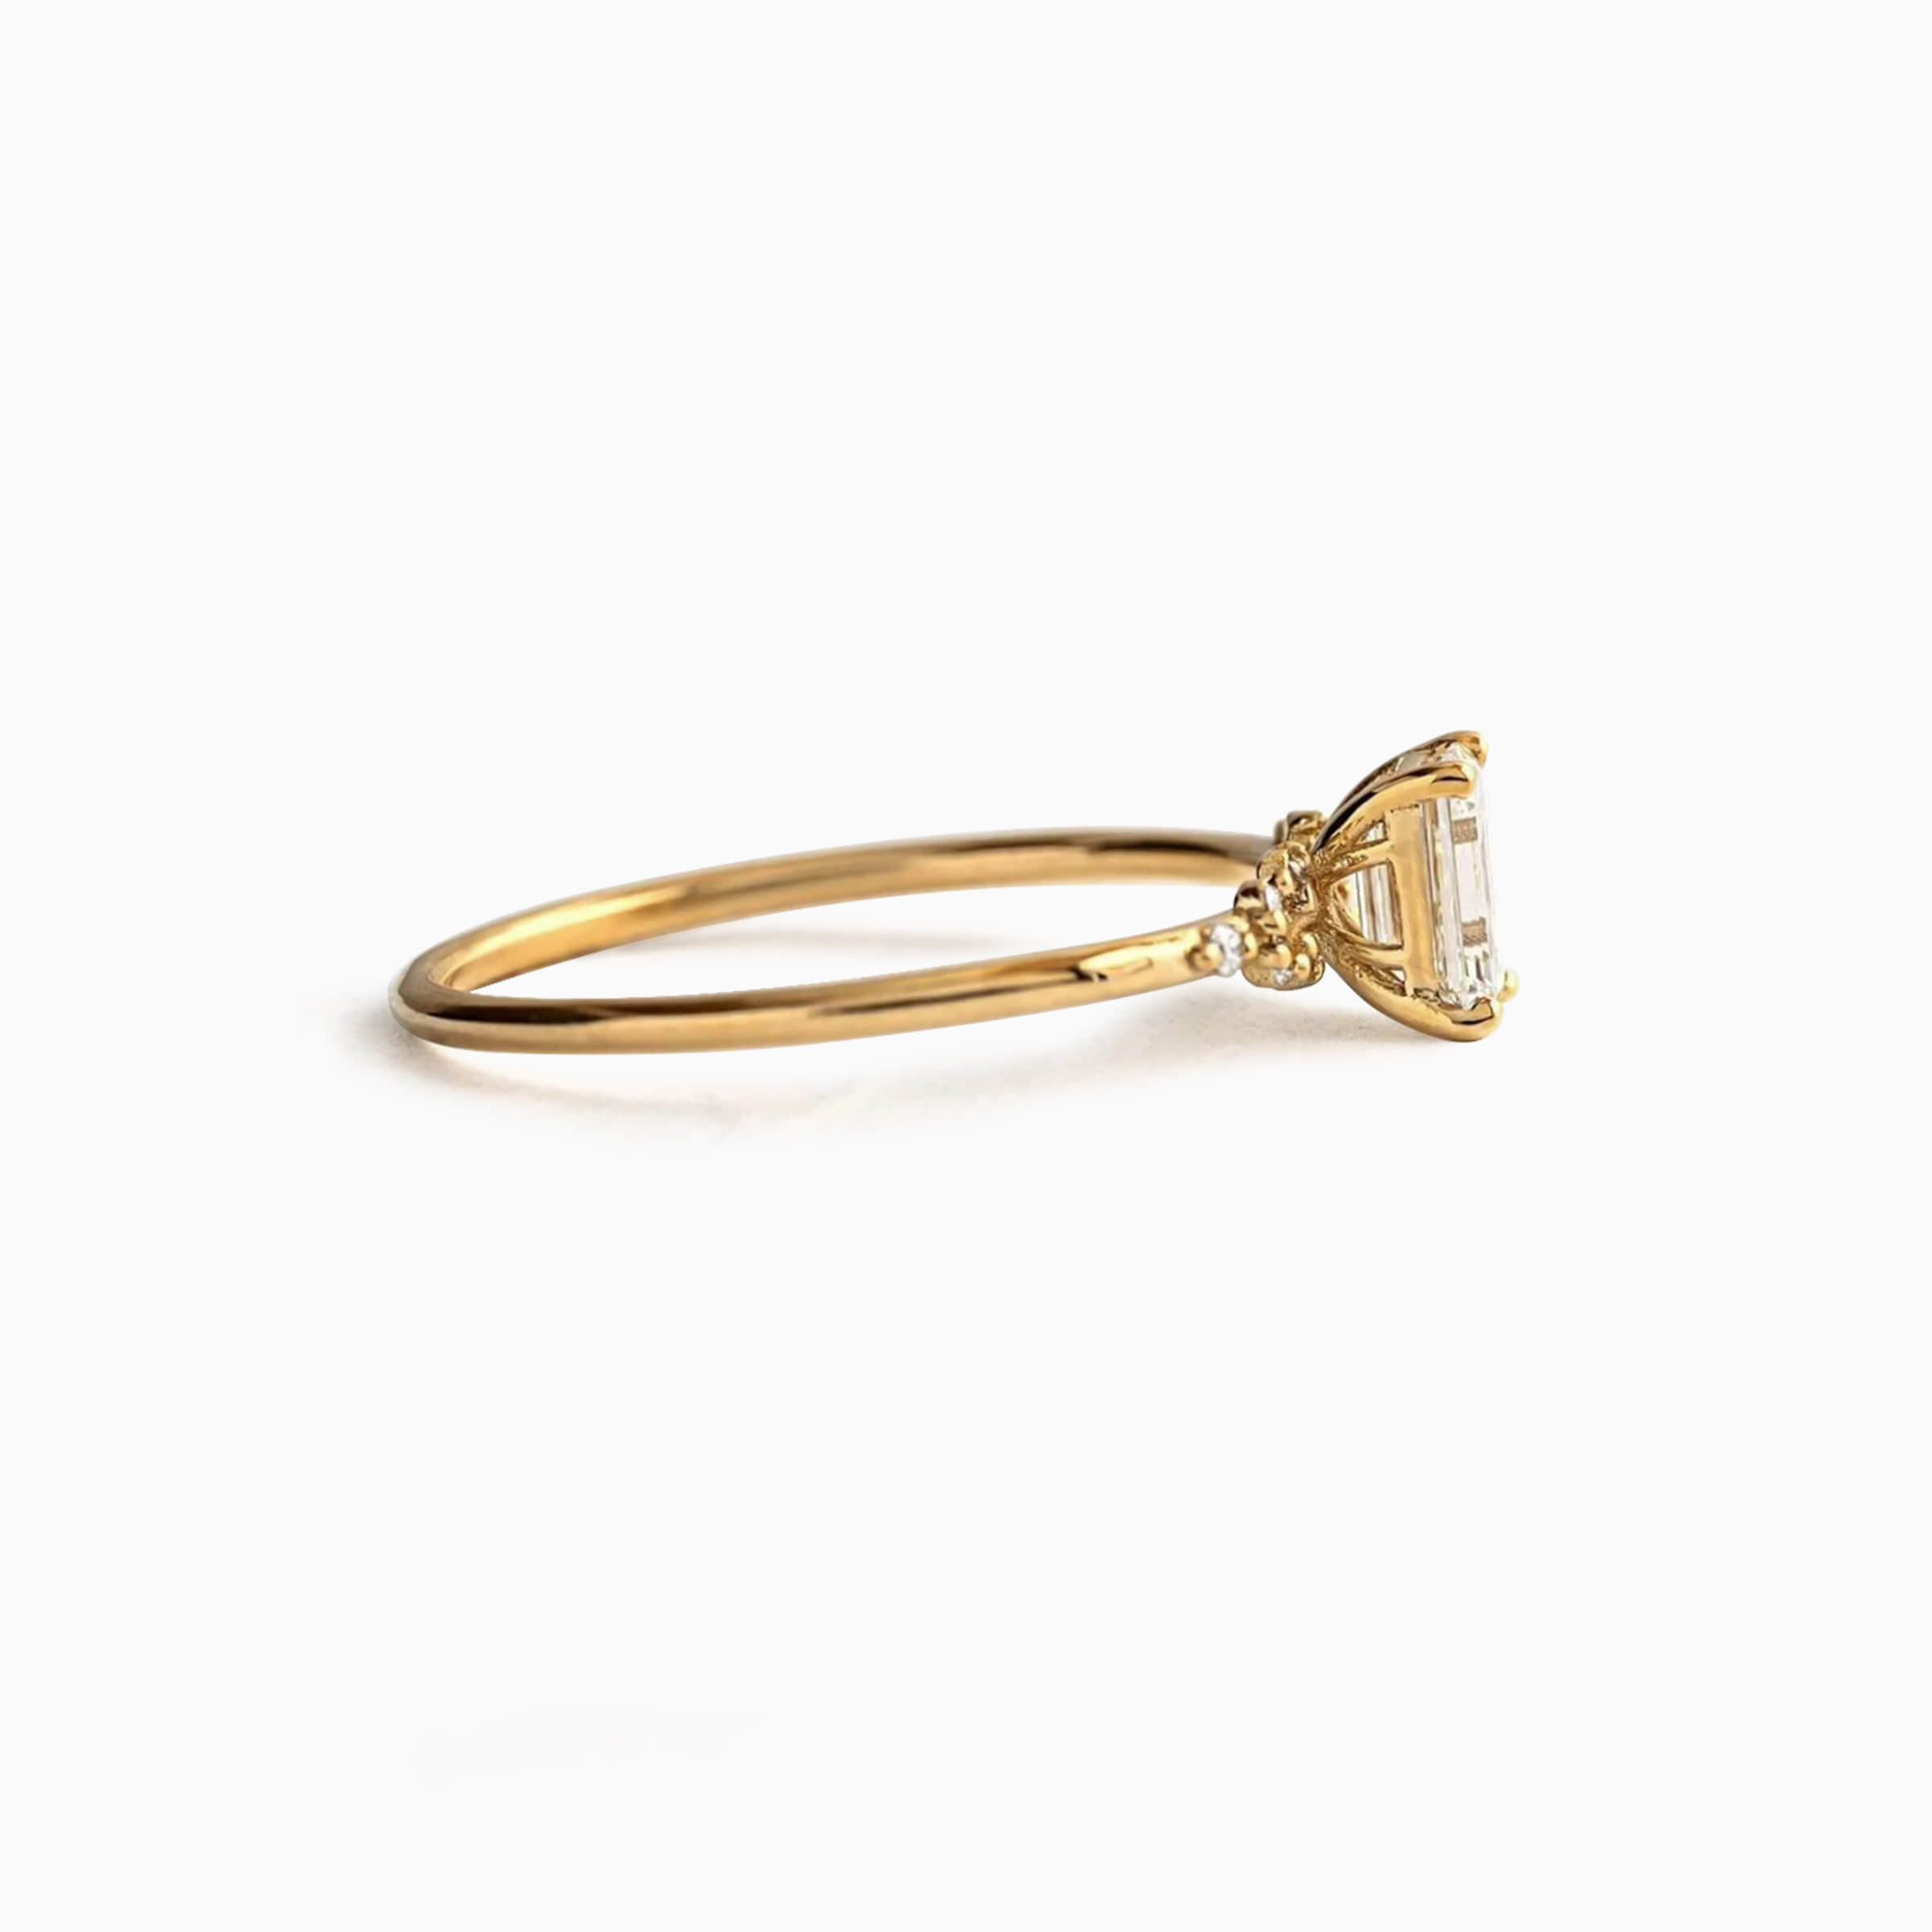 Darry Ring antiuqe emerald cut engagement ring yellow gold in side view